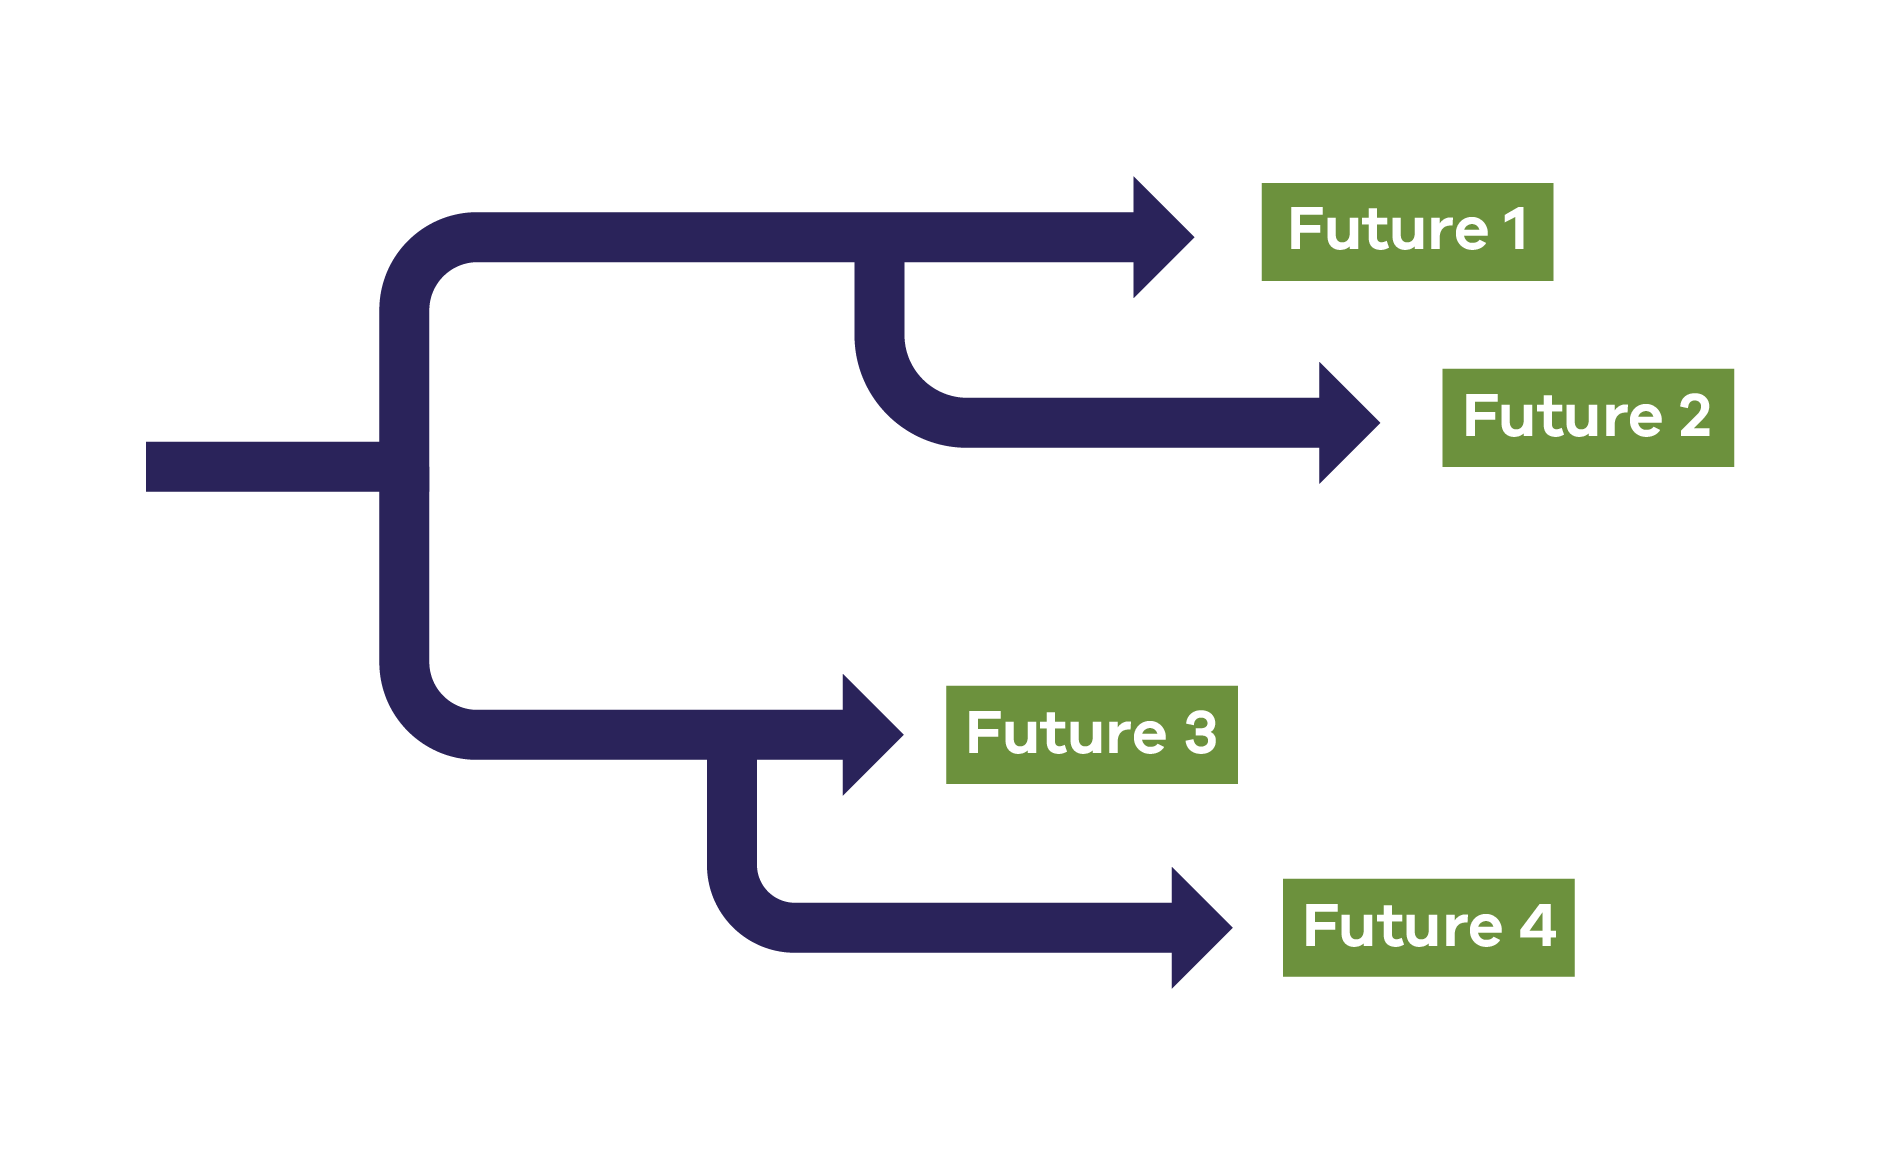 Image showing branching arrows indicating possible futures